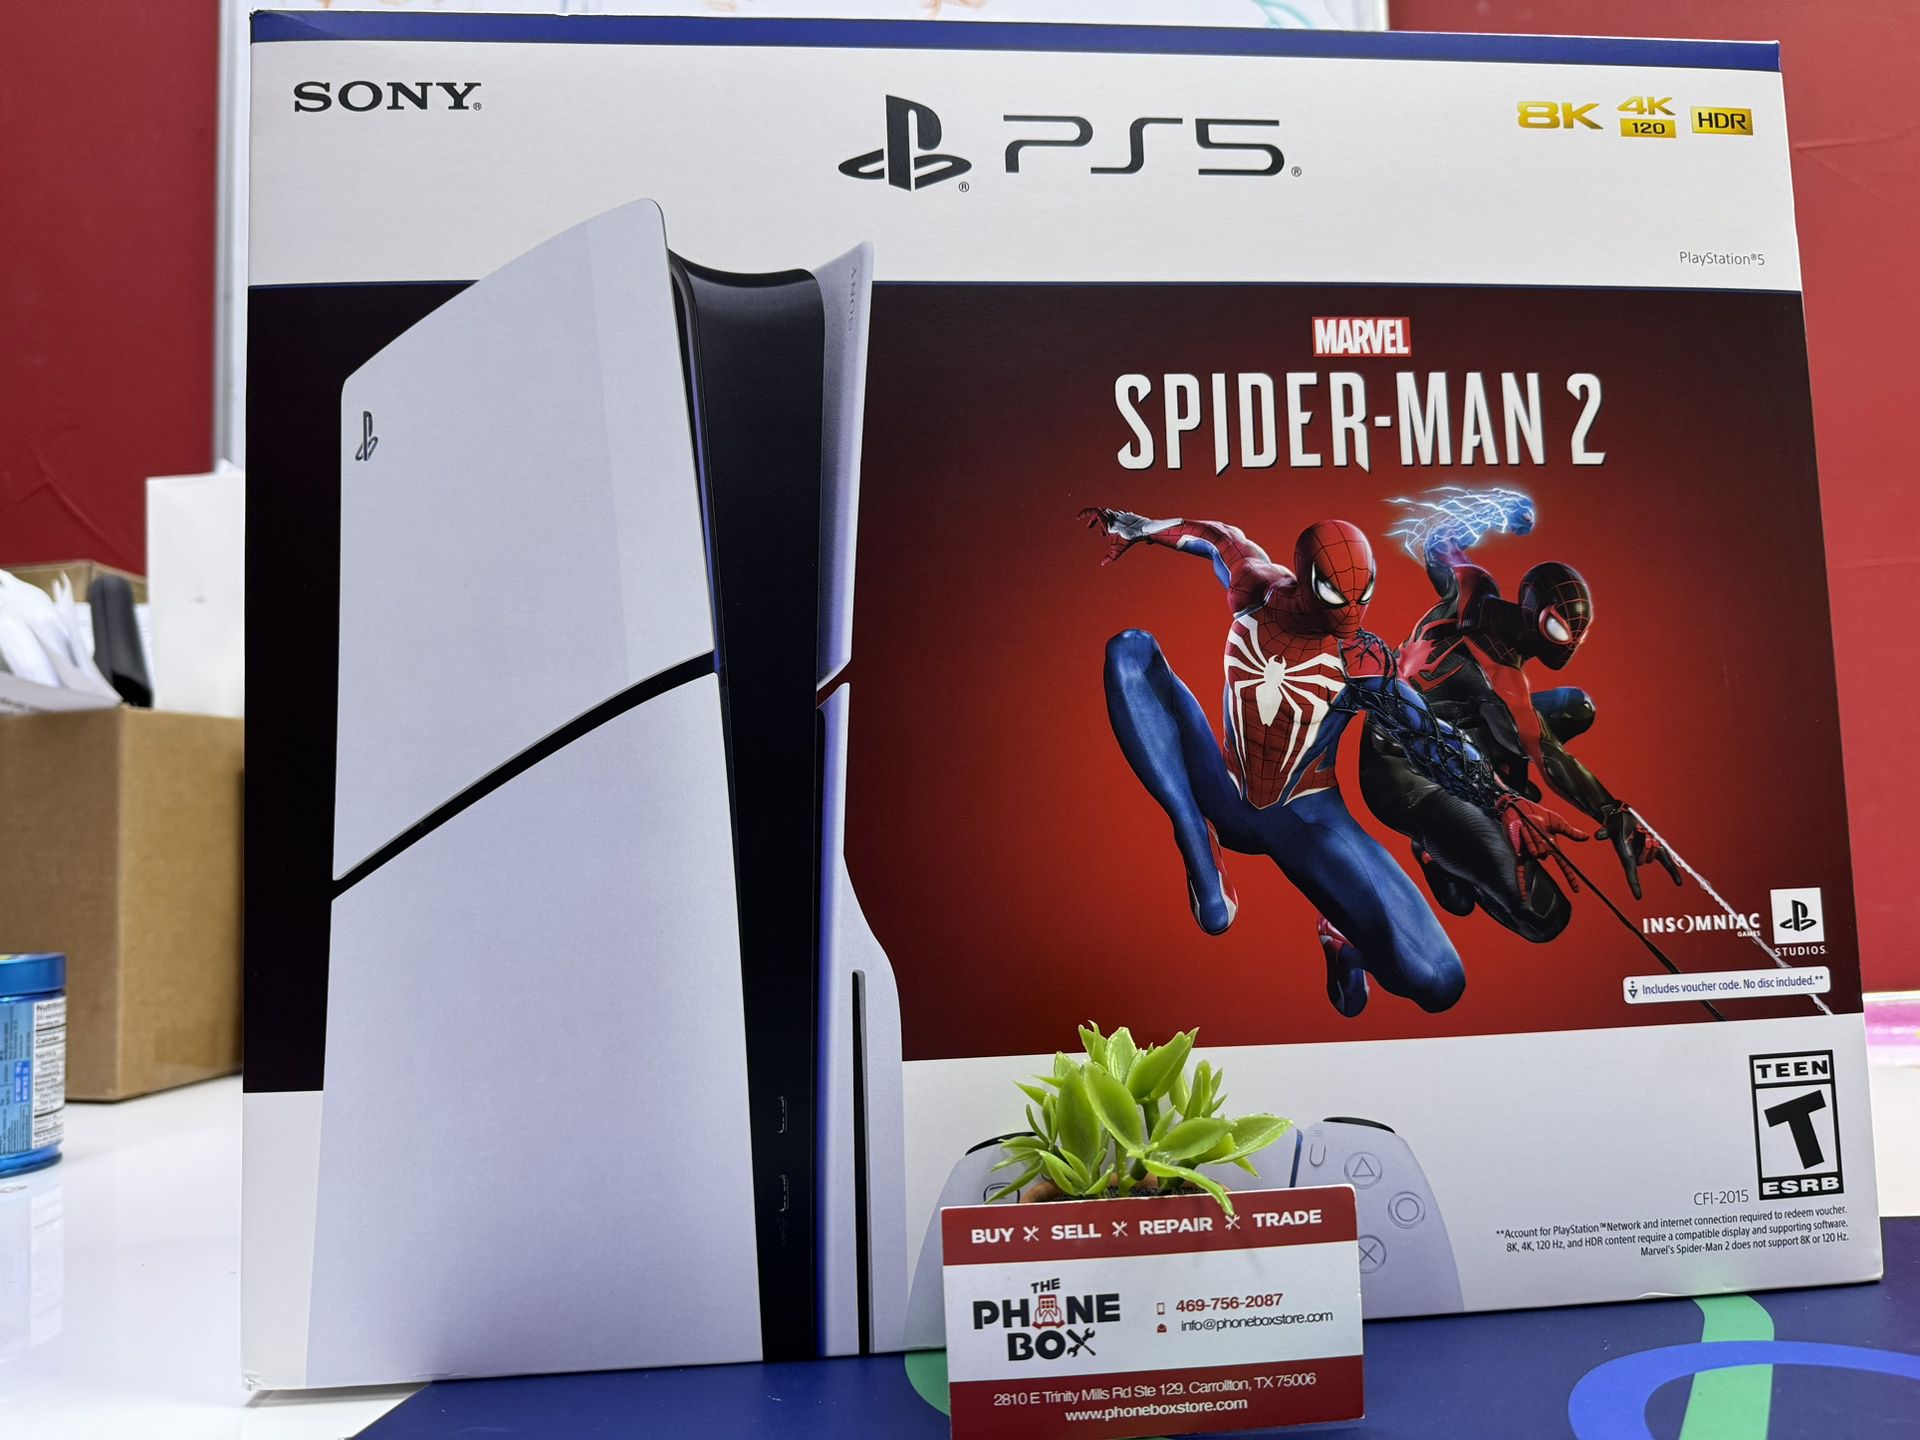 PlayStation 5 Spider-Man Slim Disc Available On Finance